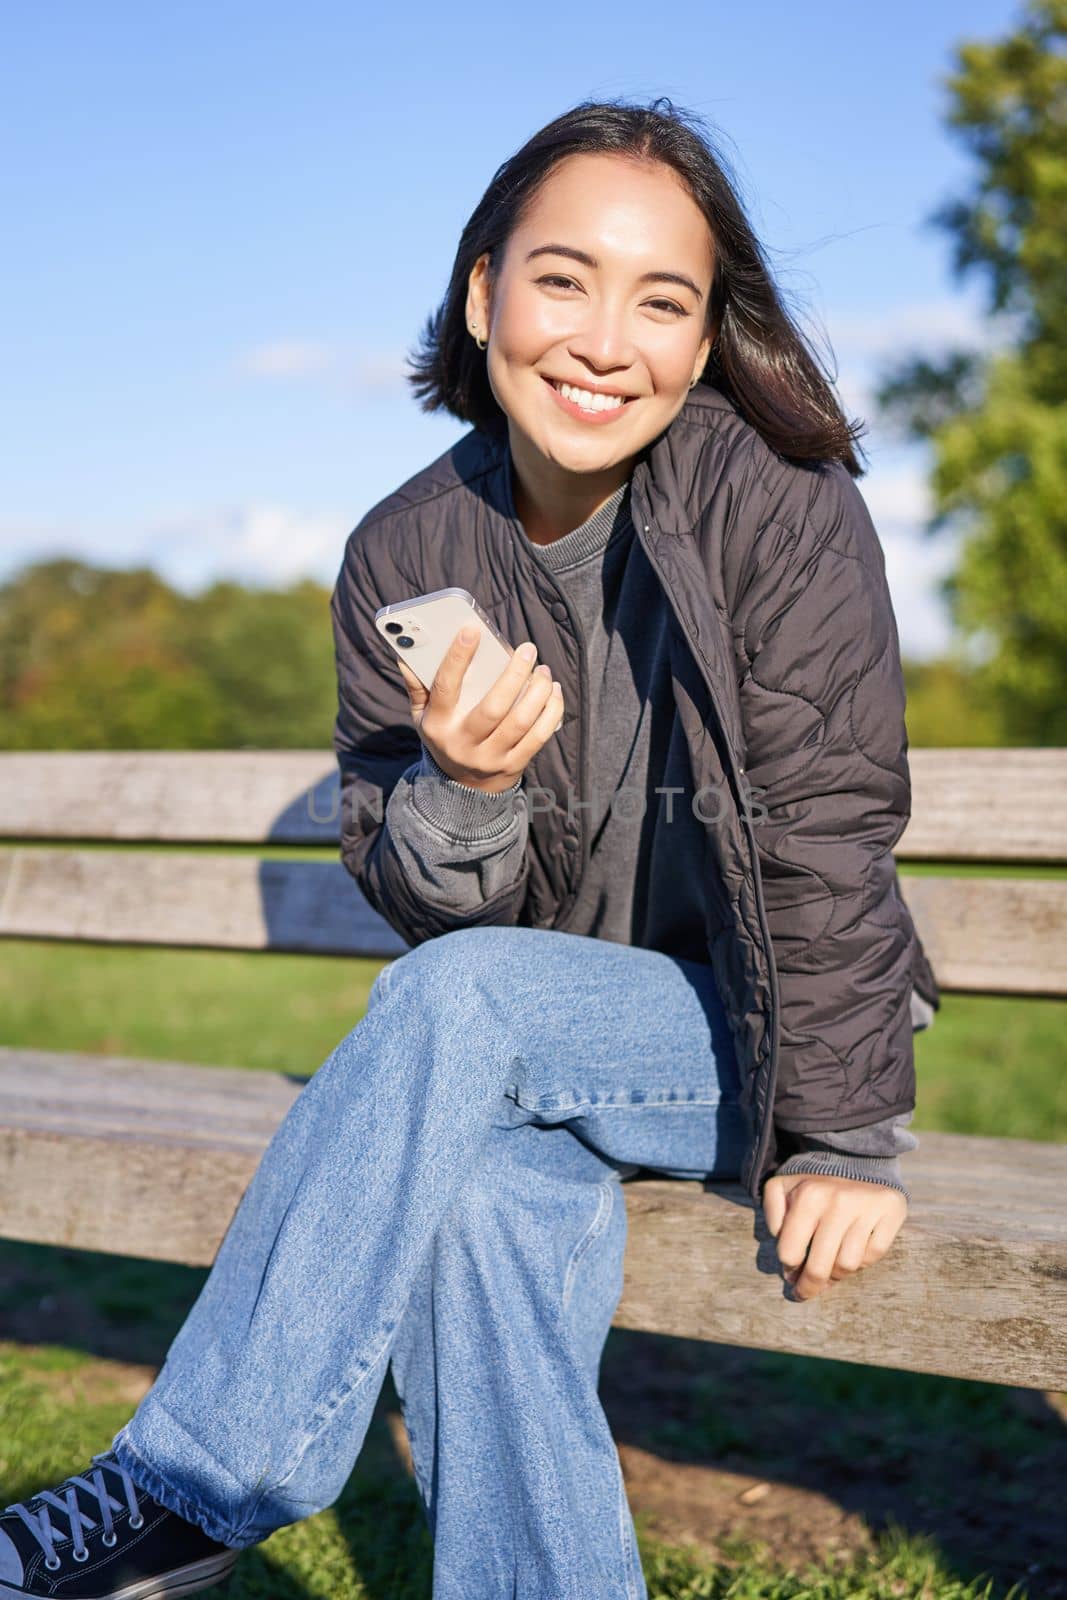 Cute young woman with smartphone in hands, sitting on bench and smiling, using mobile phone, waiting for someone in park by Benzoix